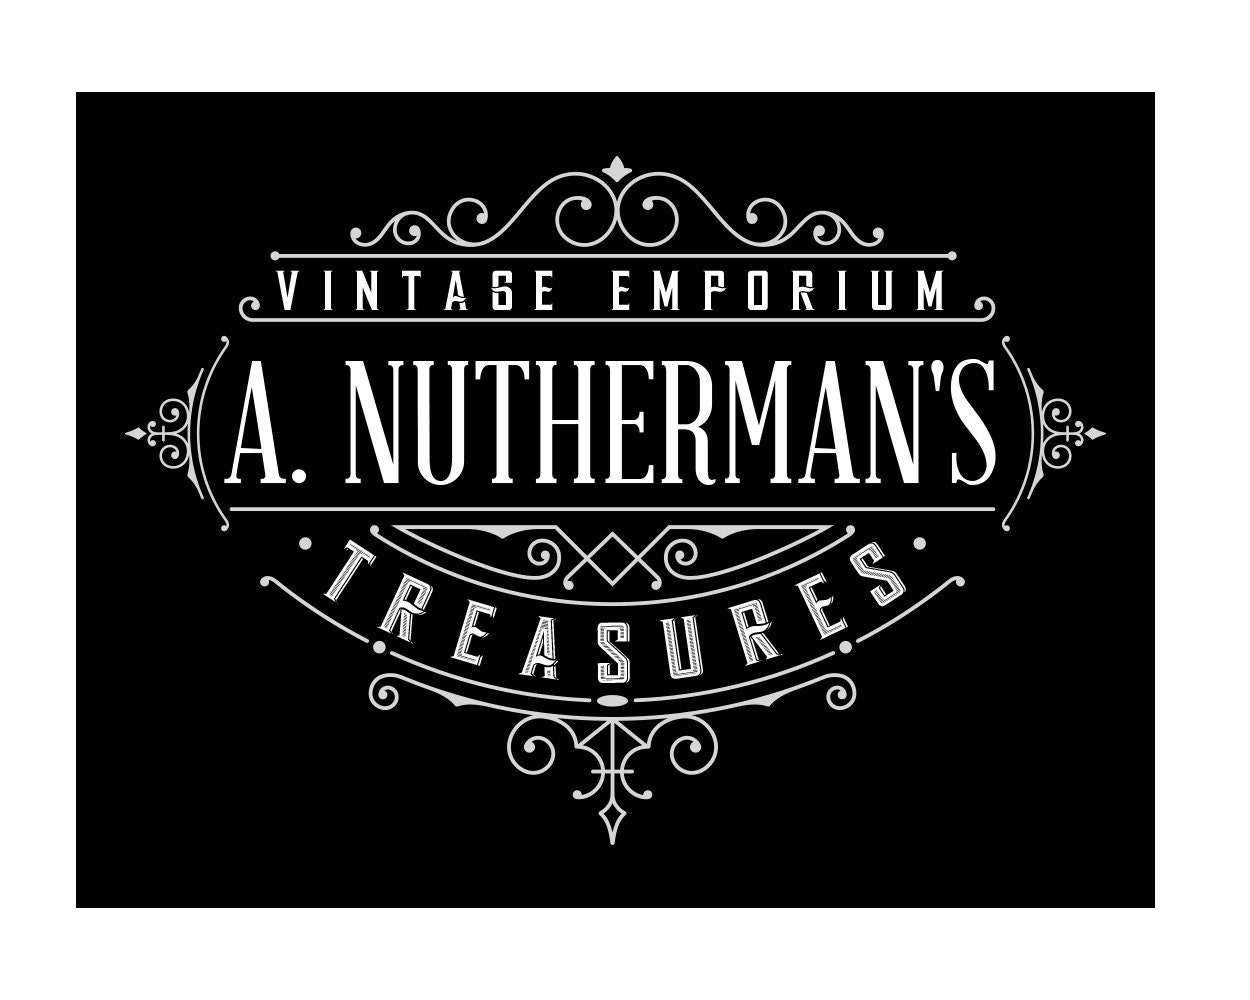 A. Nuthermans Treasures